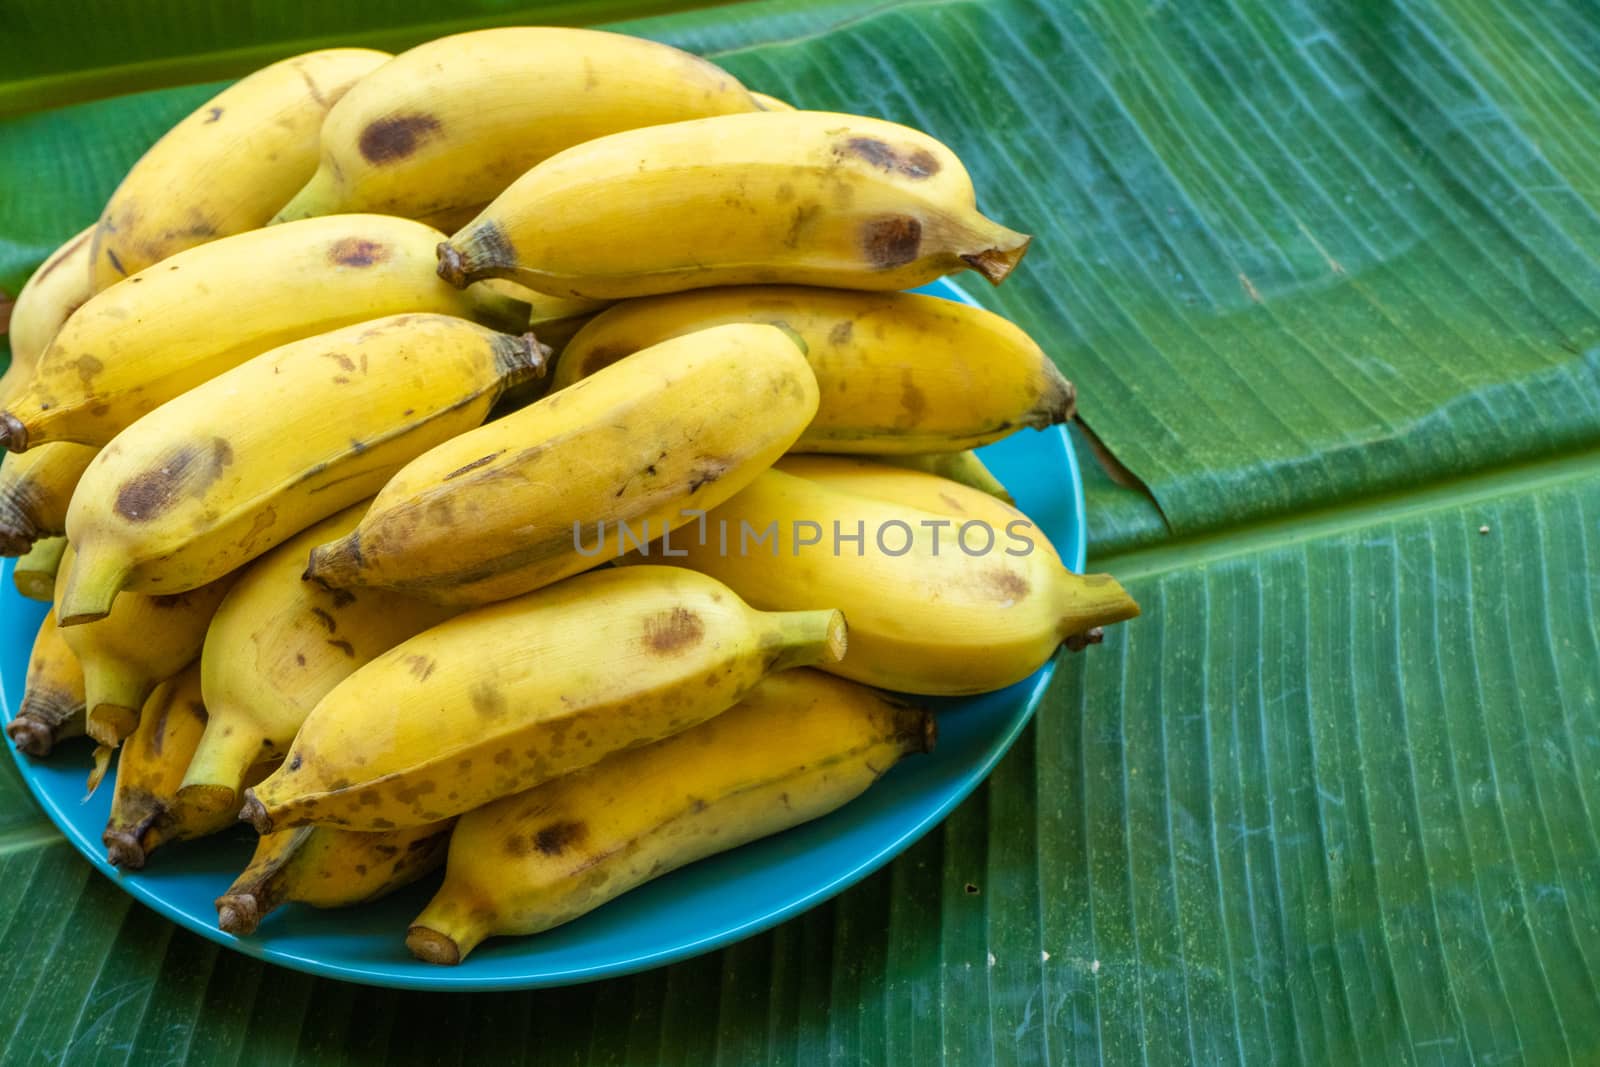 plate with ripe yellow bananas on a large yellow banana leaf.